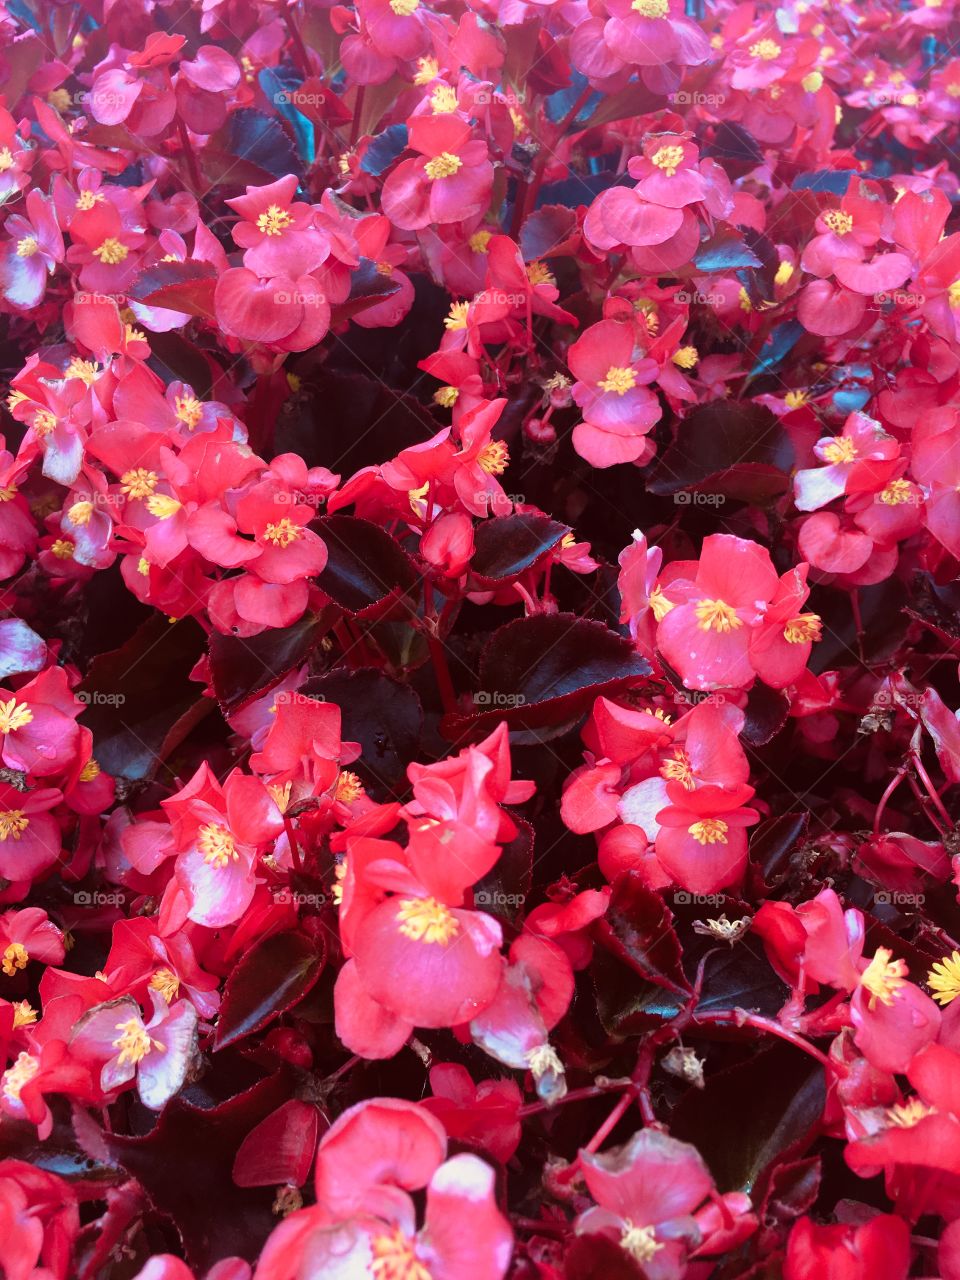 Small bright red flowers